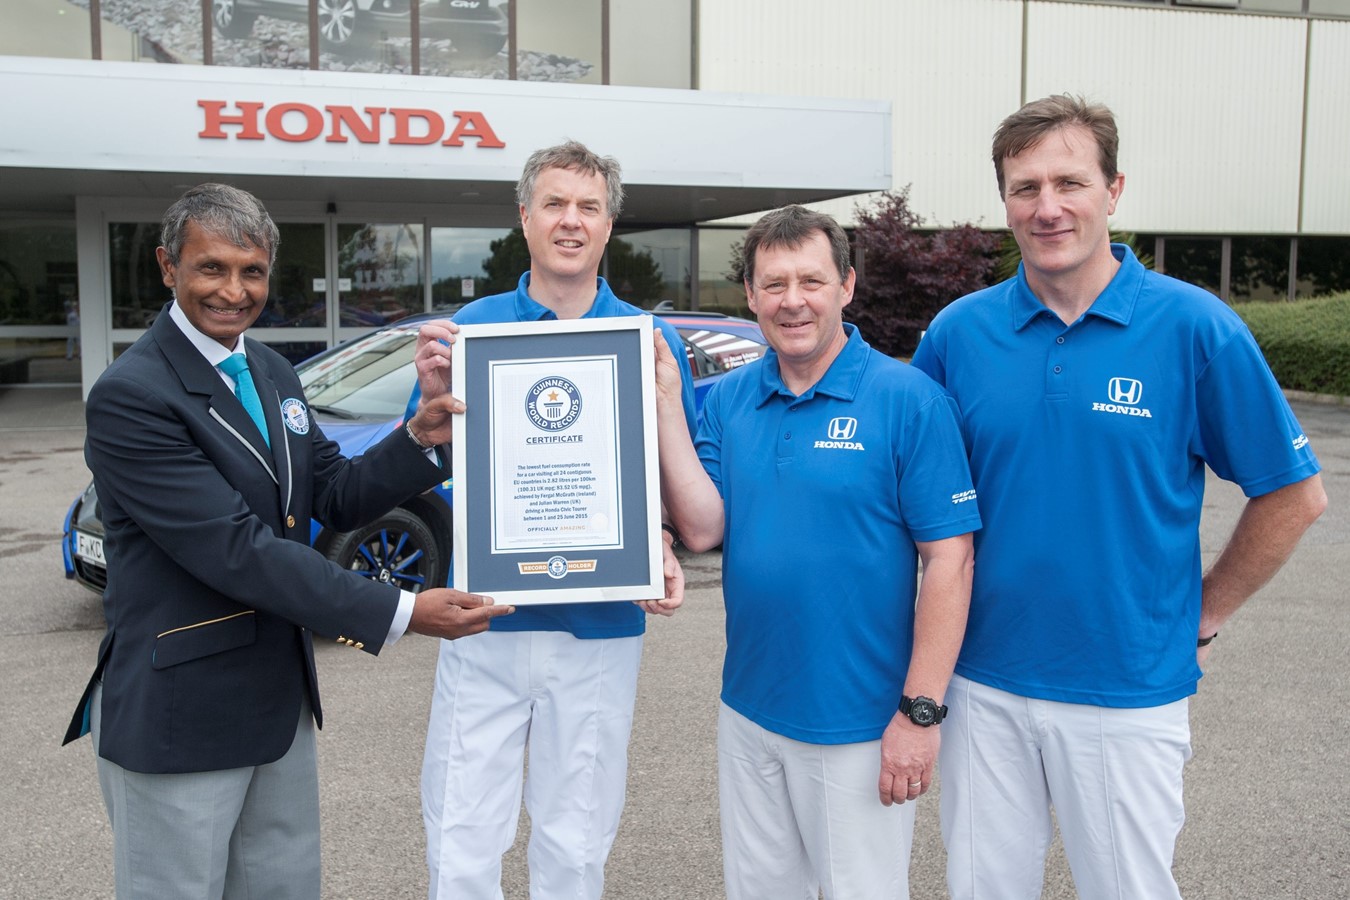 Honda sets new GUINNESS WORLD RECORDS™ title for fuel efficiency, averaging 2.82 litres per 100km (100.31mpg) in 13,498km (8,387 mile) drive across 24 EU countries.